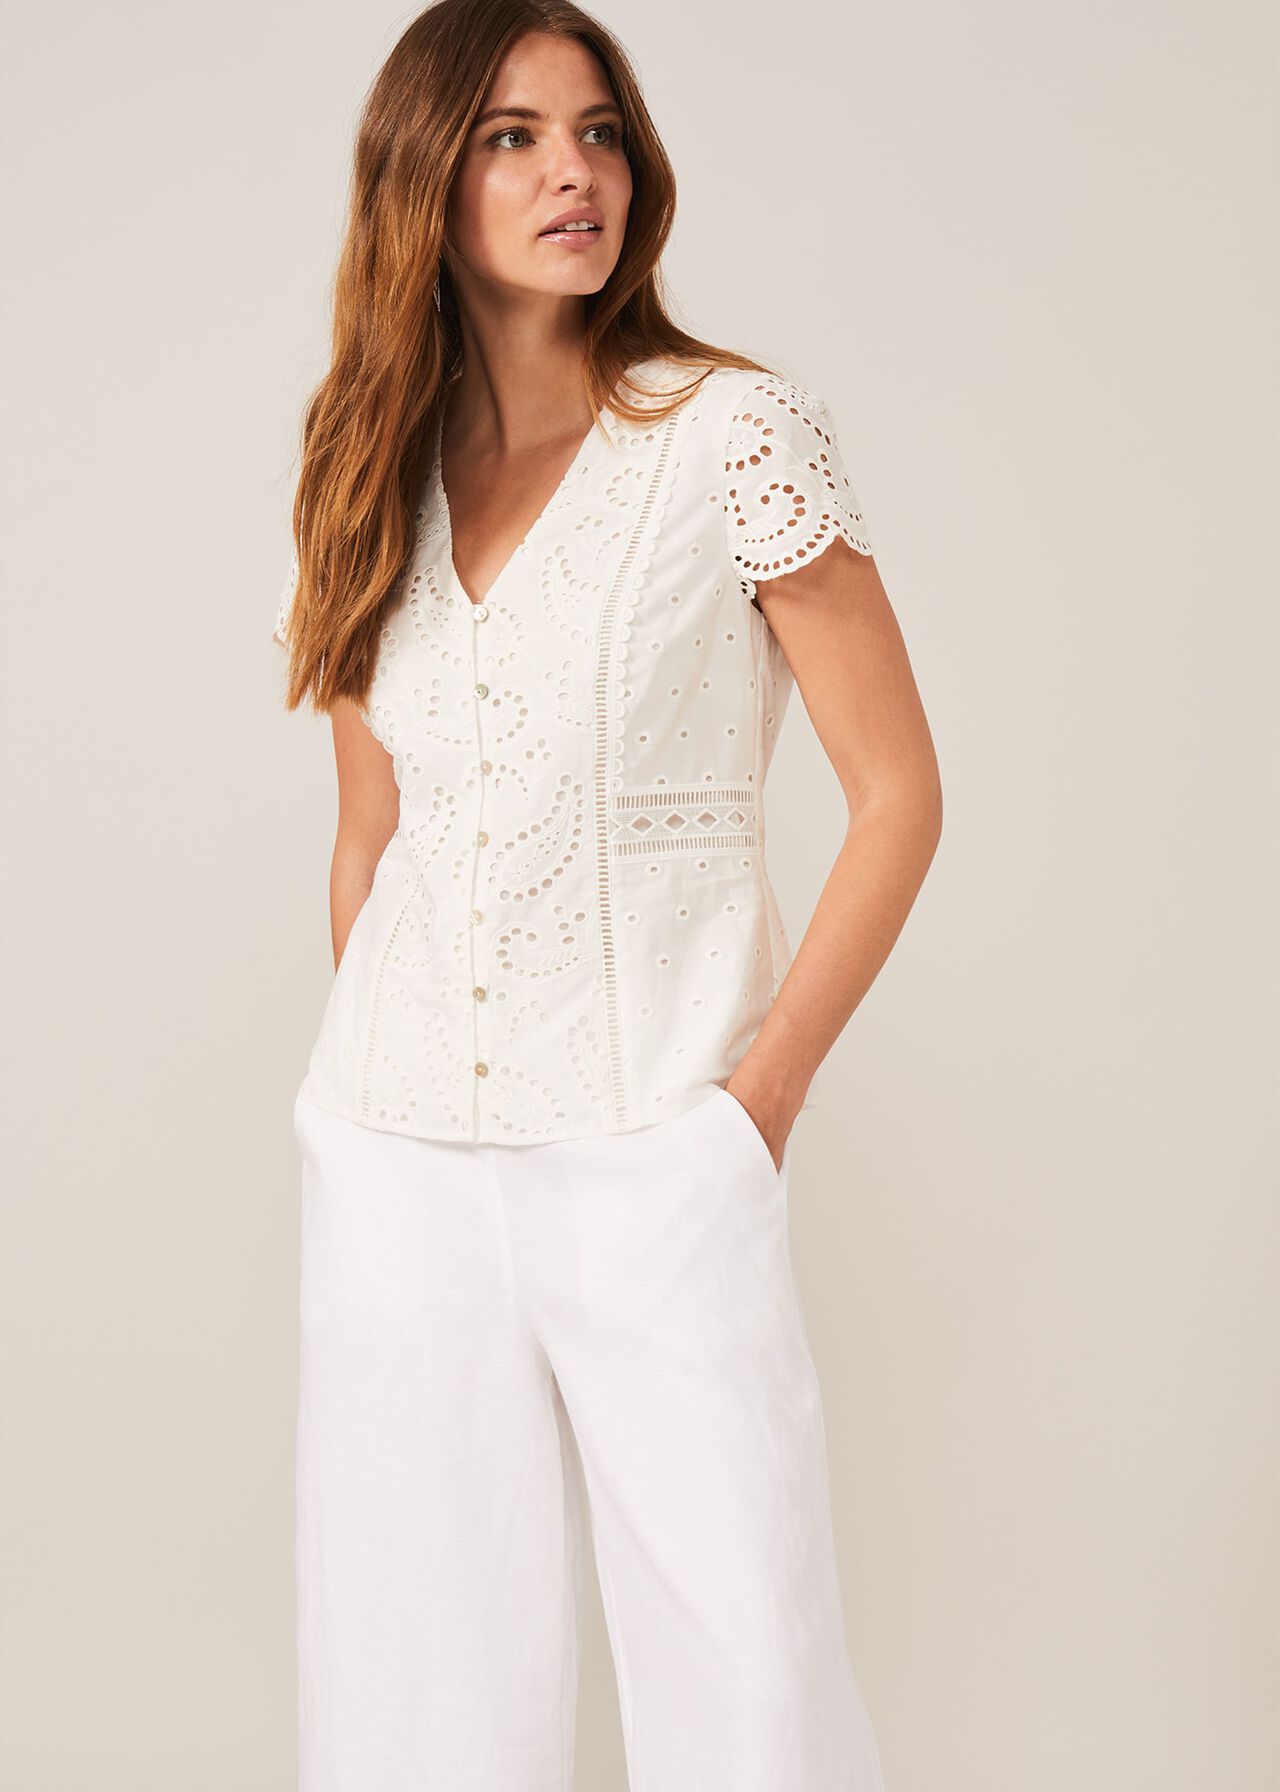 Lula Broderie Blouse